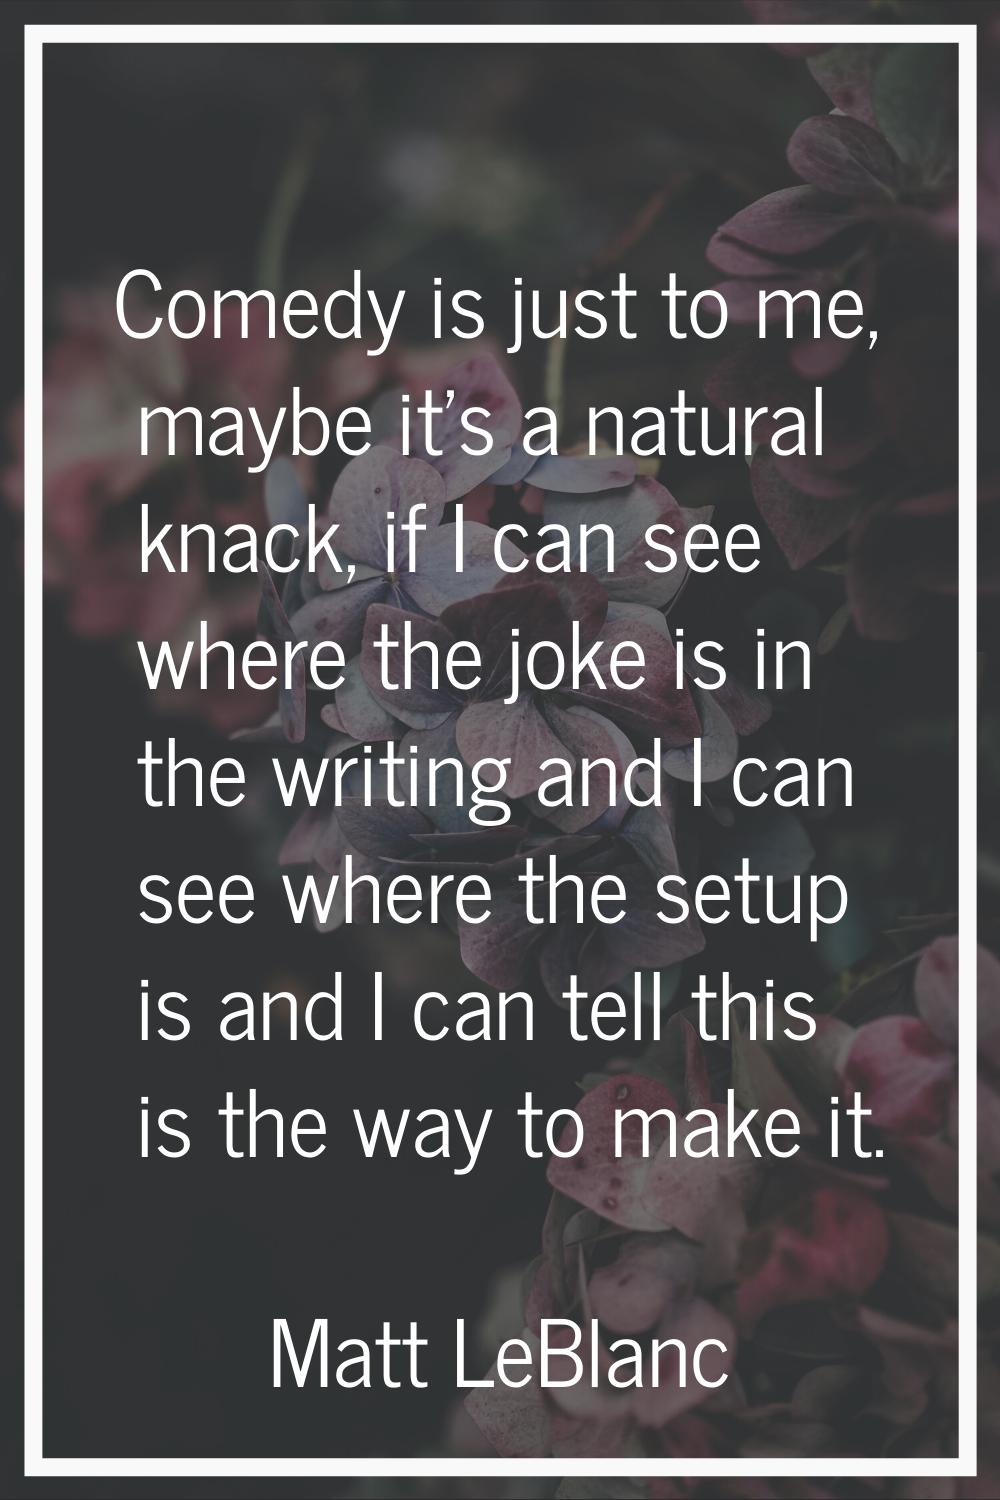 Comedy is just to me, maybe it's a natural knack, if I can see where the joke is in the writing and